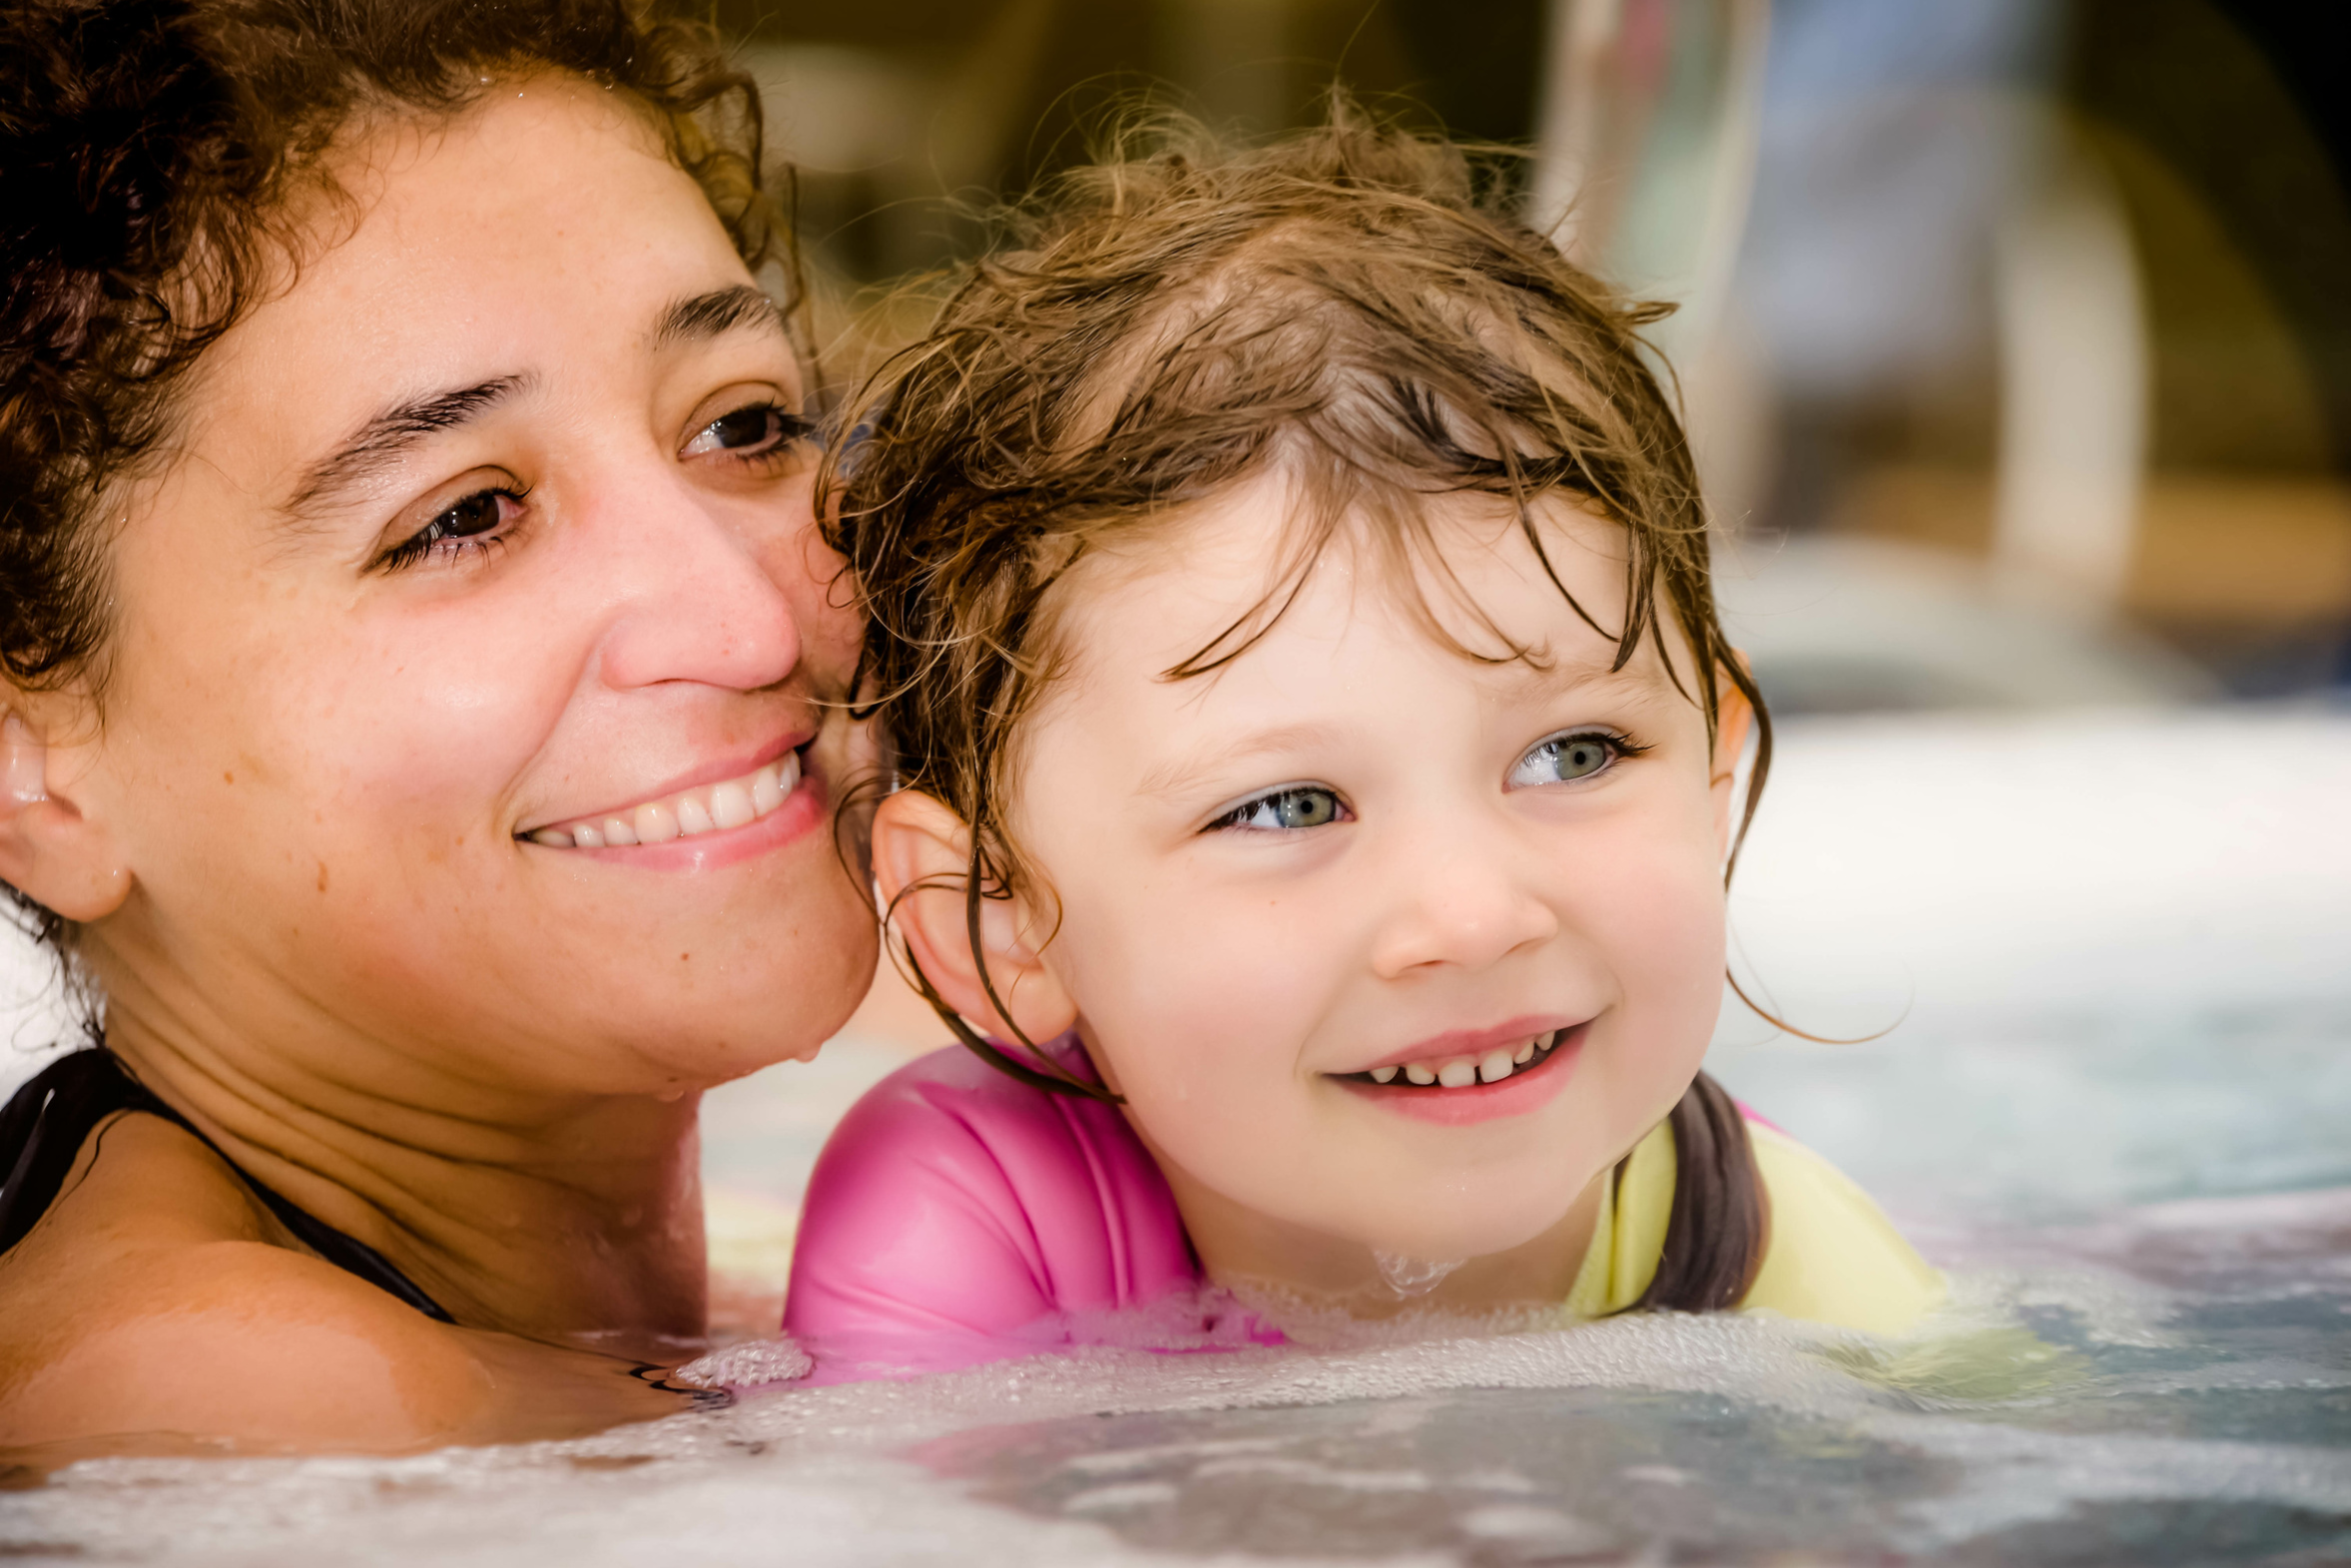 Treat your hot tub loving Mom: Five great gift ideas